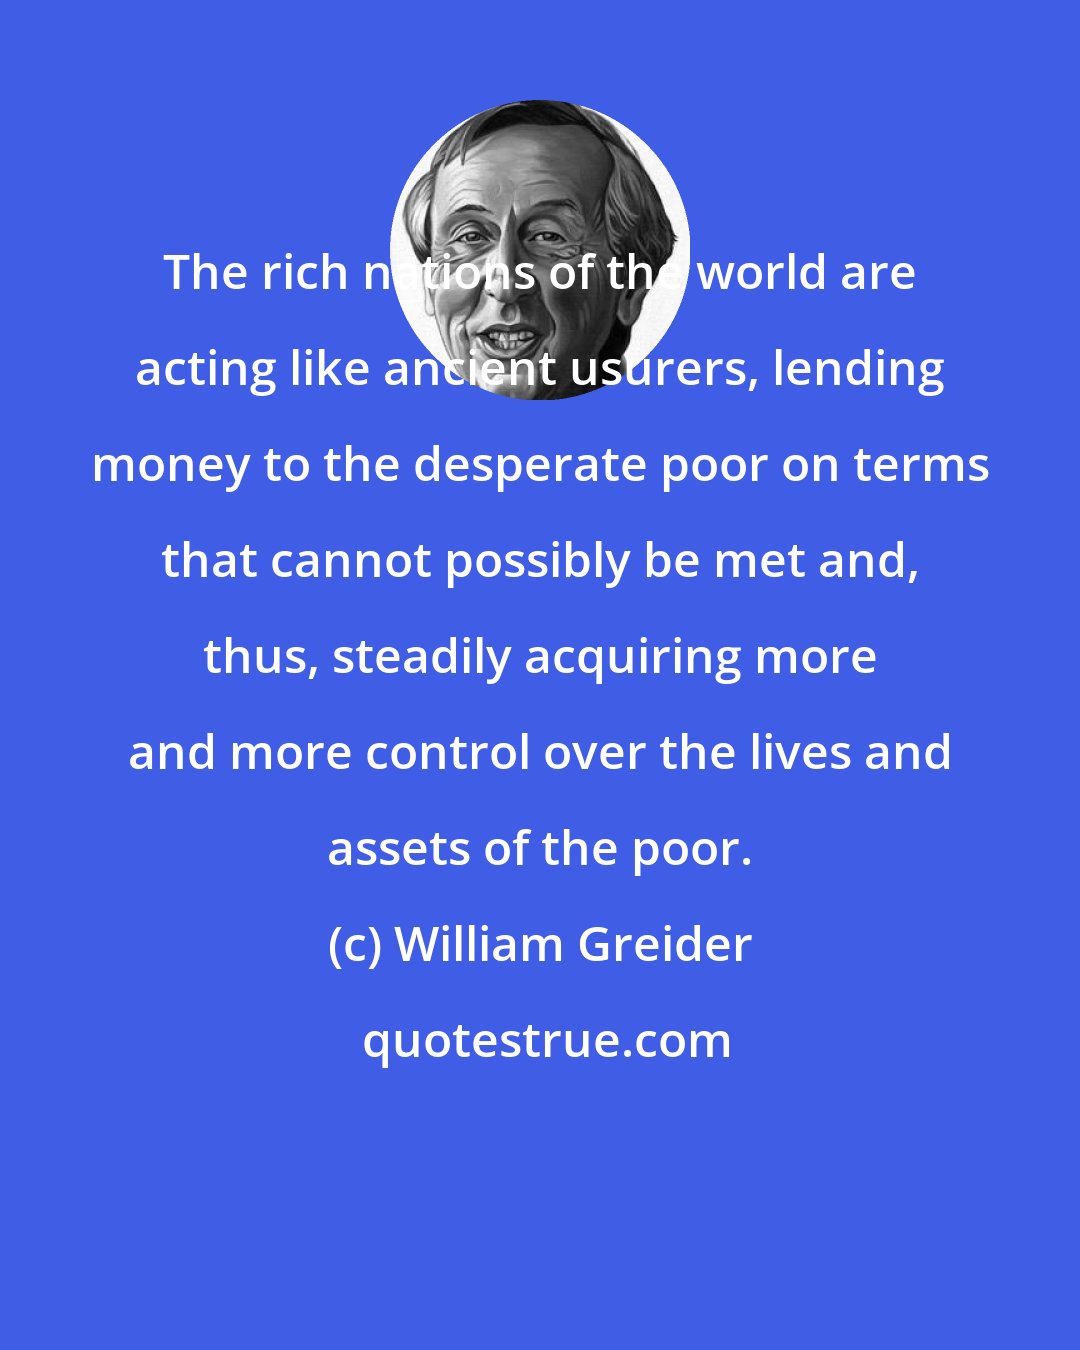 William Greider: The rich nations of the world are acting like ancient usurers, lending money to the desperate poor on terms that cannot possibly be met and, thus, steadily acquiring more and more control over the lives and assets of the poor.